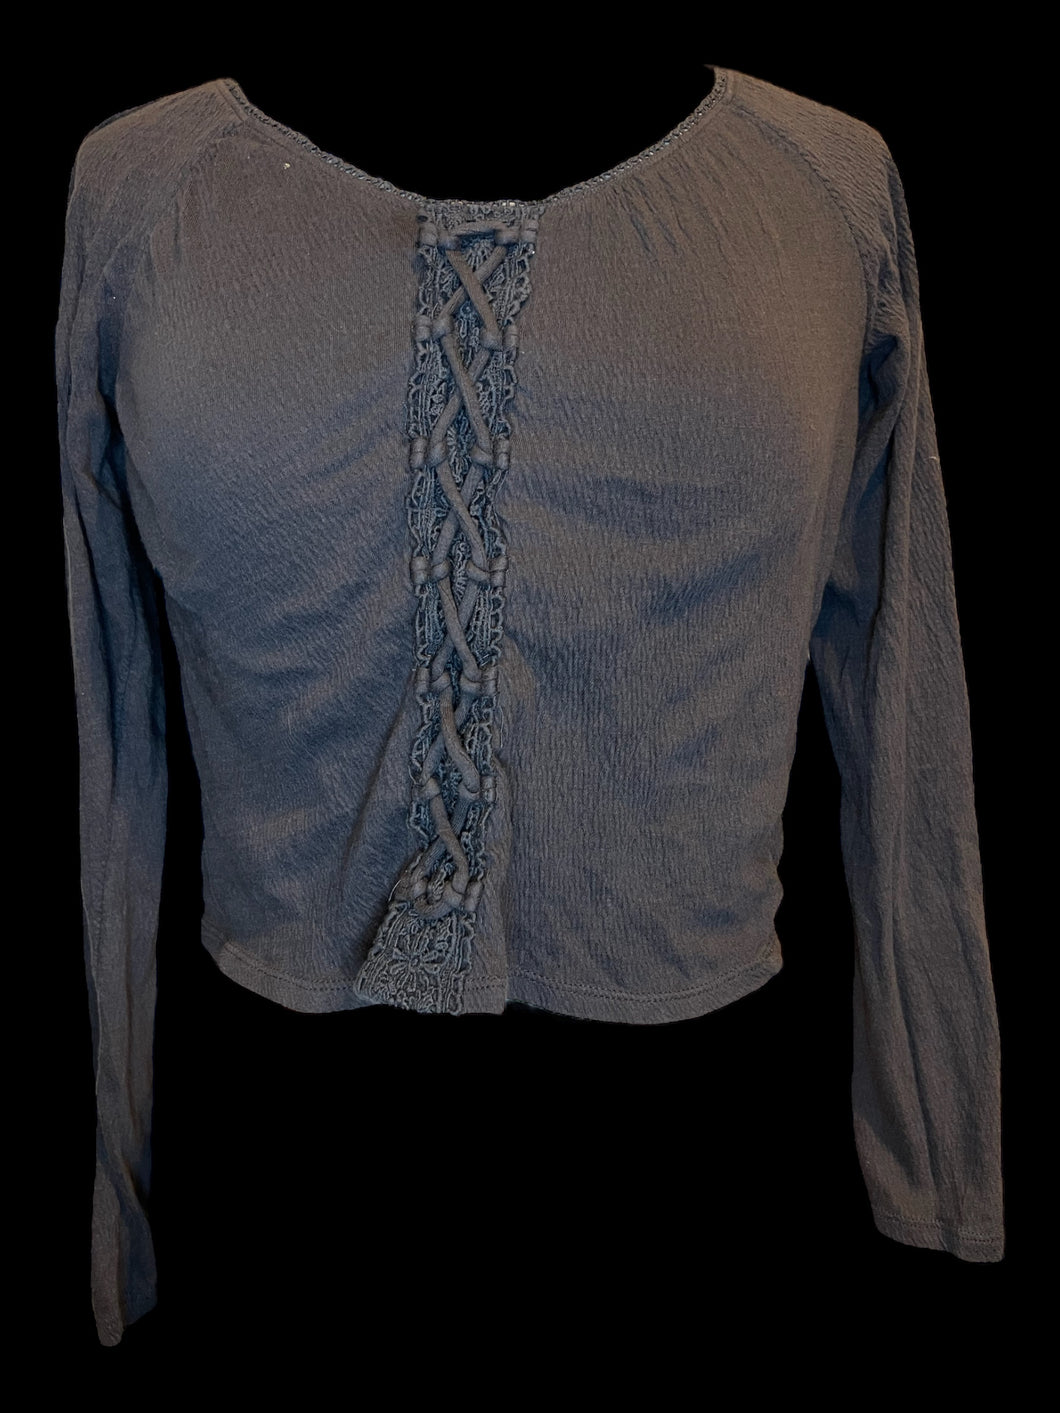 L Dark grey long sleeve crop top w/ floral lace, & lace-up detail